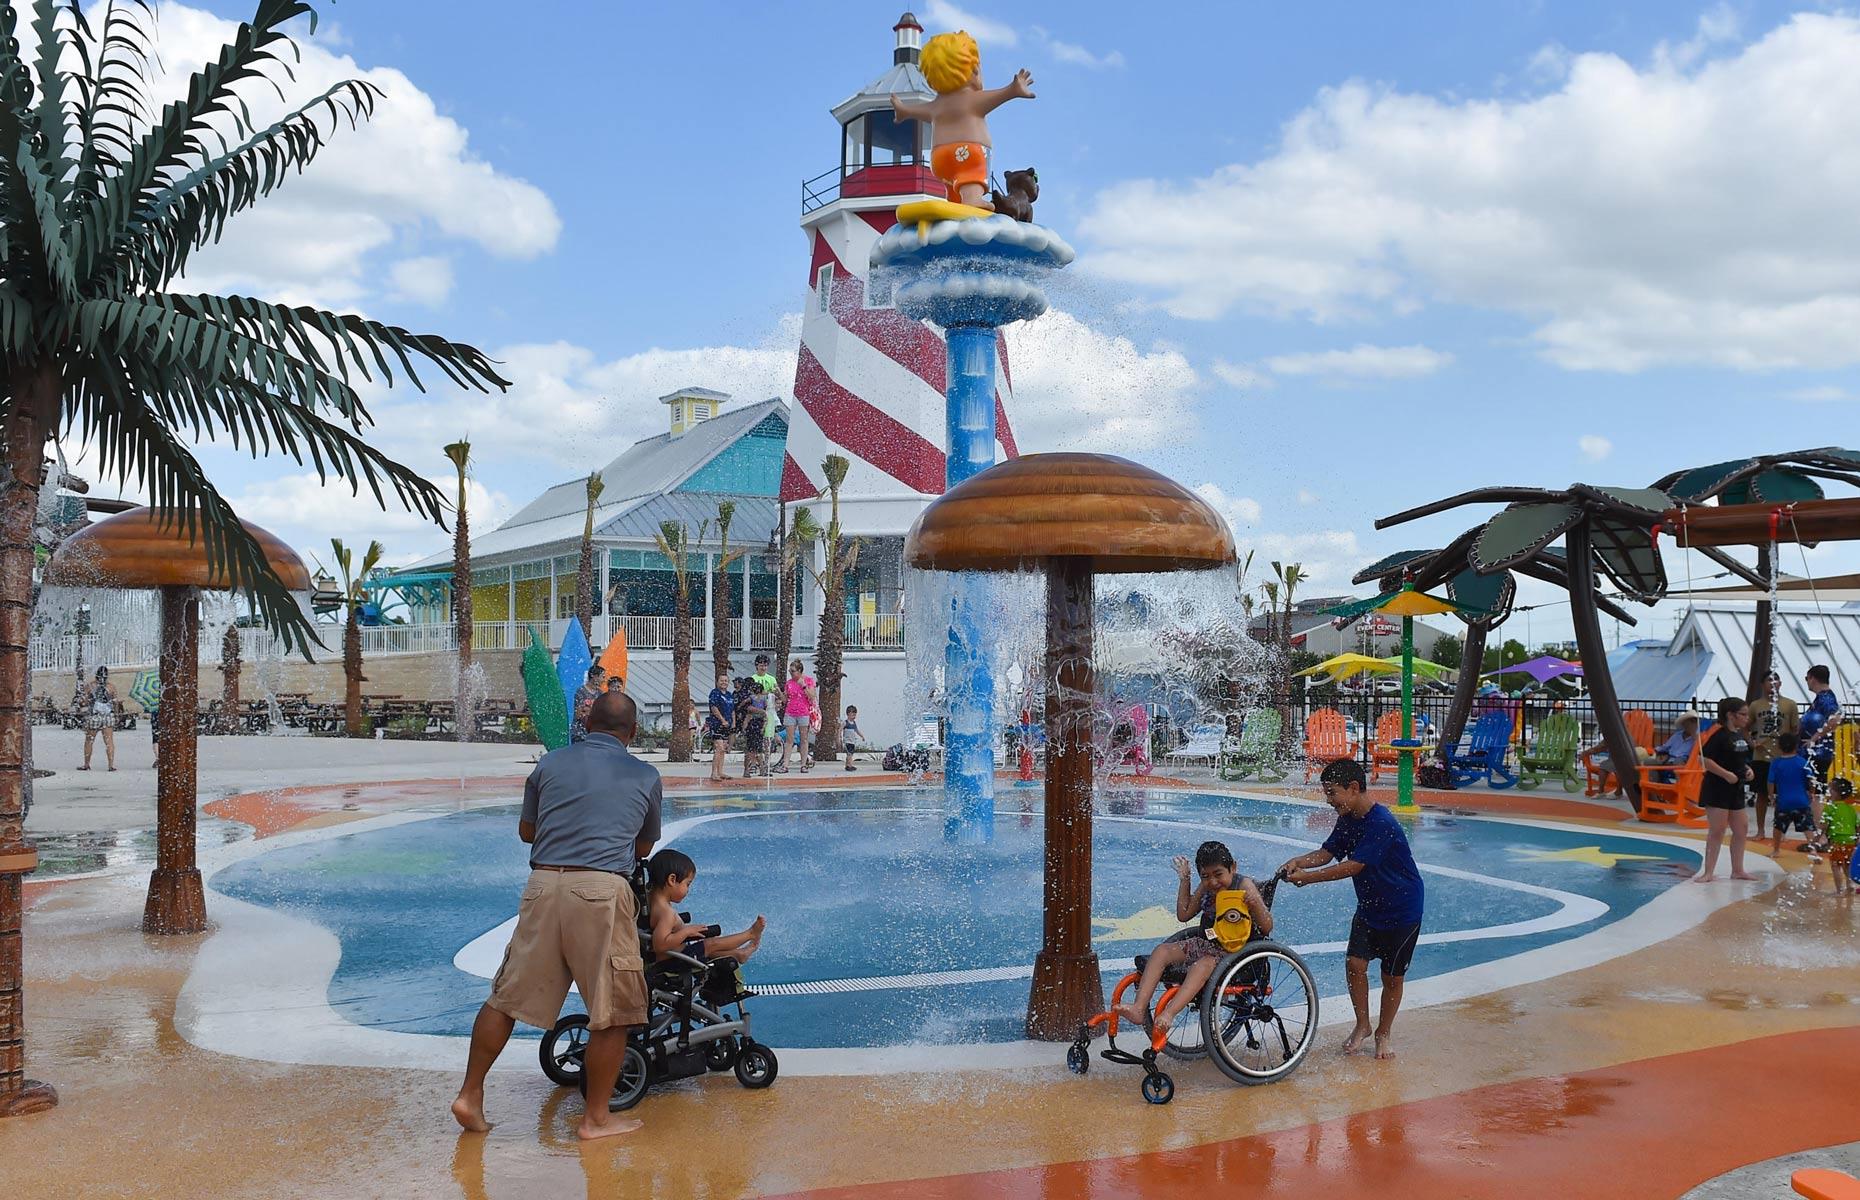 <p>Part of Morgan's Wonderland, an ultra-accessible theme park, Morgan's Inspiration Island splash park in San Antonio, Texas will reopen in spring 2024 after a $6million (£4.7m) upgrade. Every part of the pioneering park is wheelchair accessible, from the River Boat Adventure ride to the five water play areas featuring waterfalls, pools, geysers, jets, water cannons and tipping buckets. Waterproof wheelchairs are available and special wristbands allow parents or carers to easily locate their party. New attractions for 2024 will include a first-of-its-kind, wheelchair-friendly zipline and a 4D cinema to give riders in wheelchairs a roller coaster experience using a video screen with motion effects.</p>